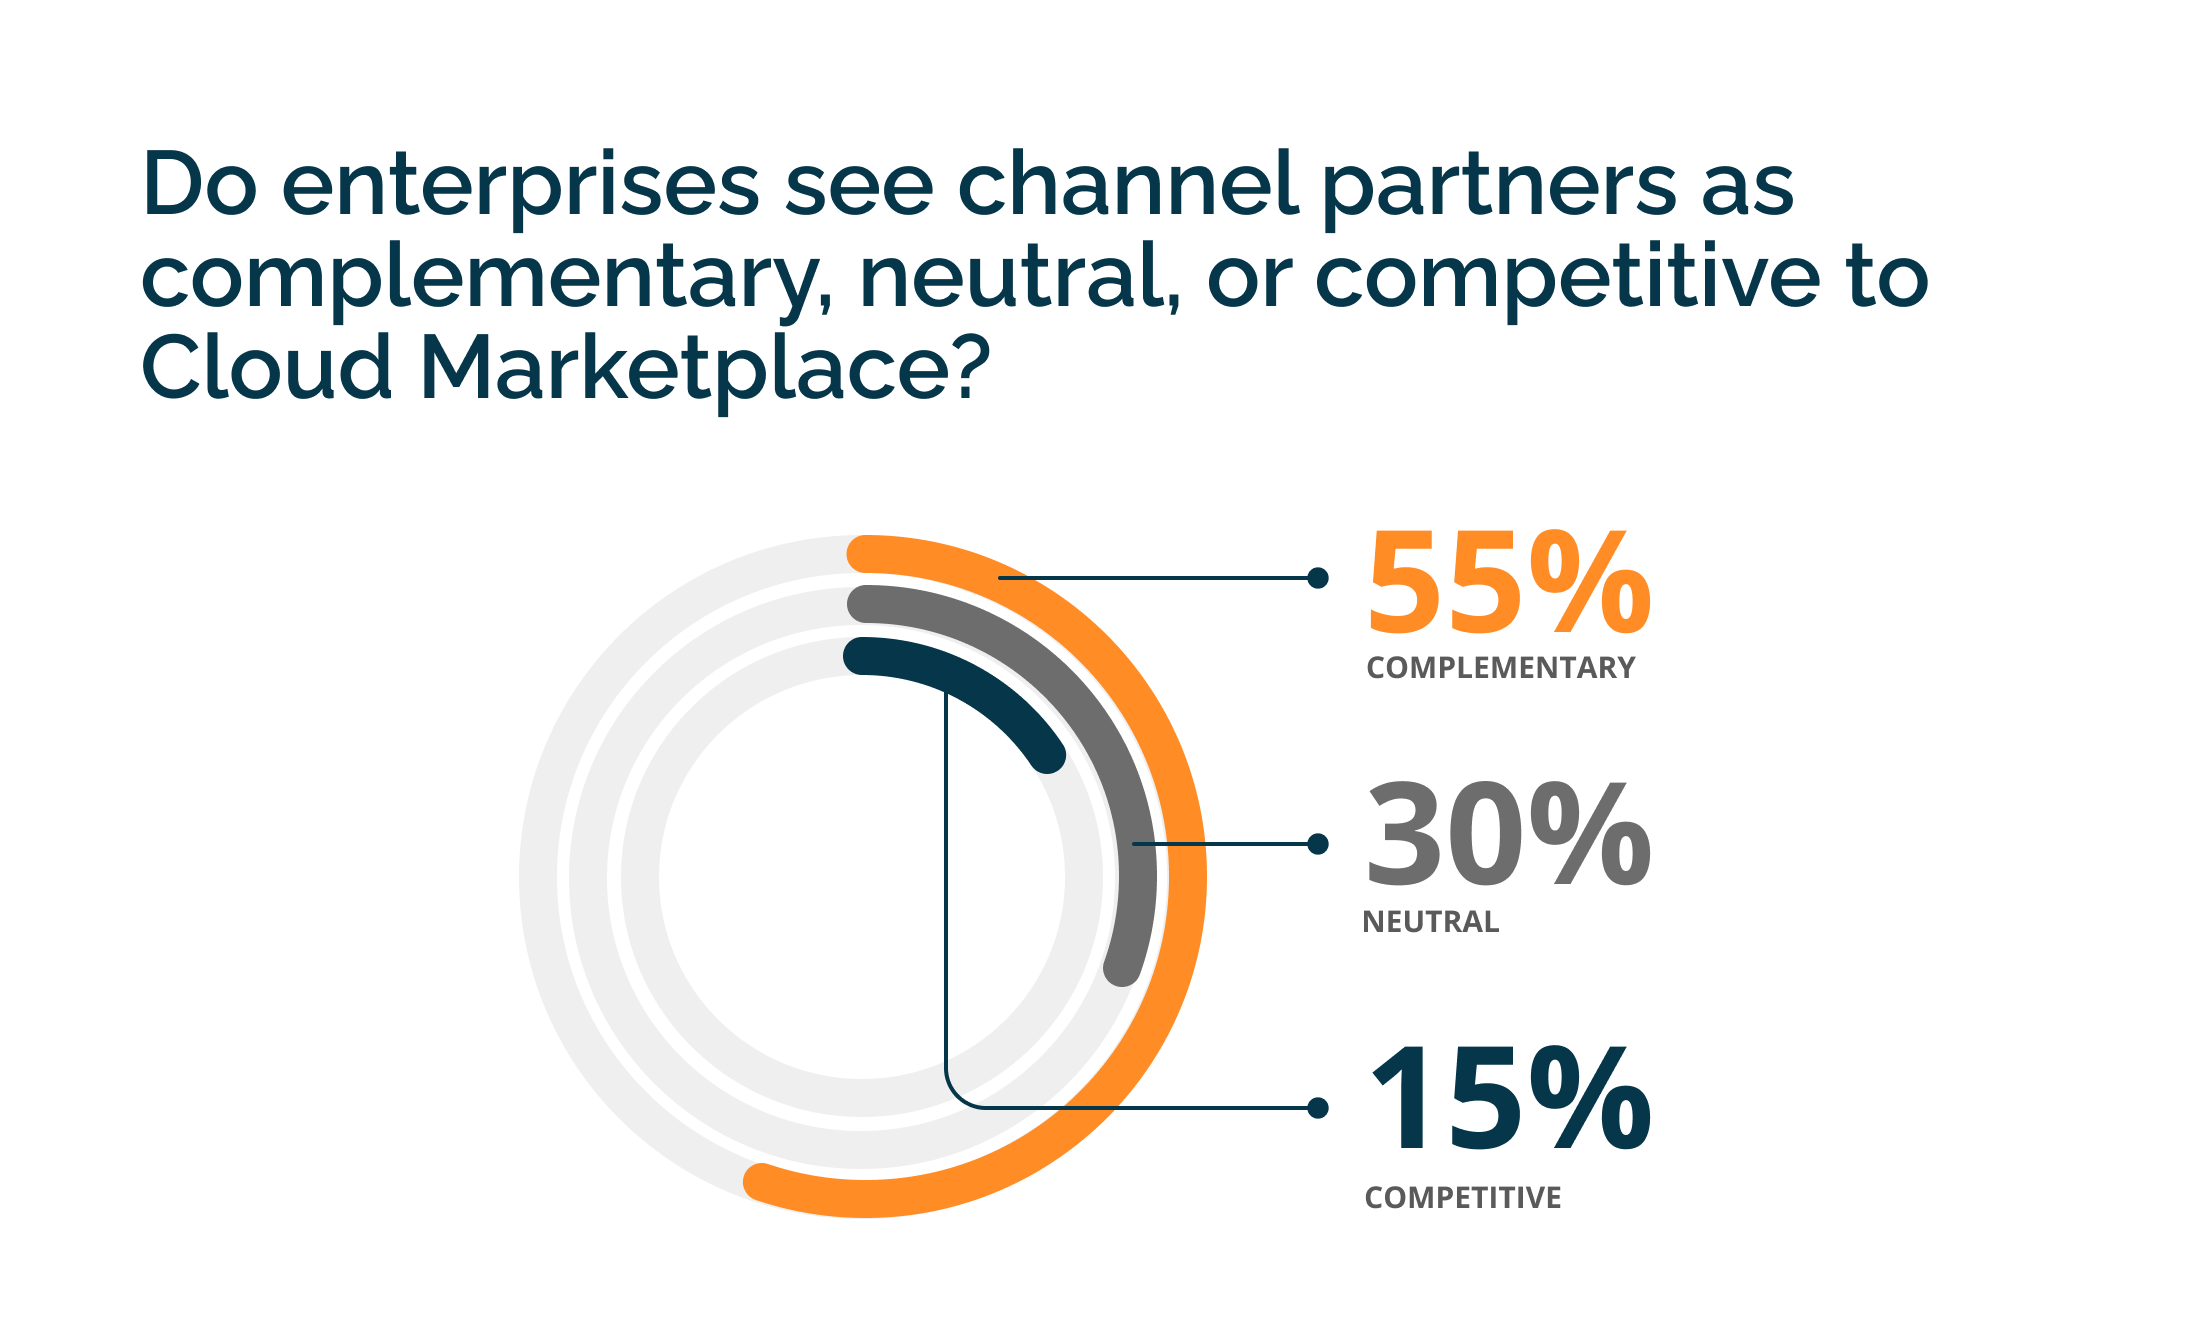 Do enterprises see channel partners as complementary, neutral, or competitive to cloud marketplace